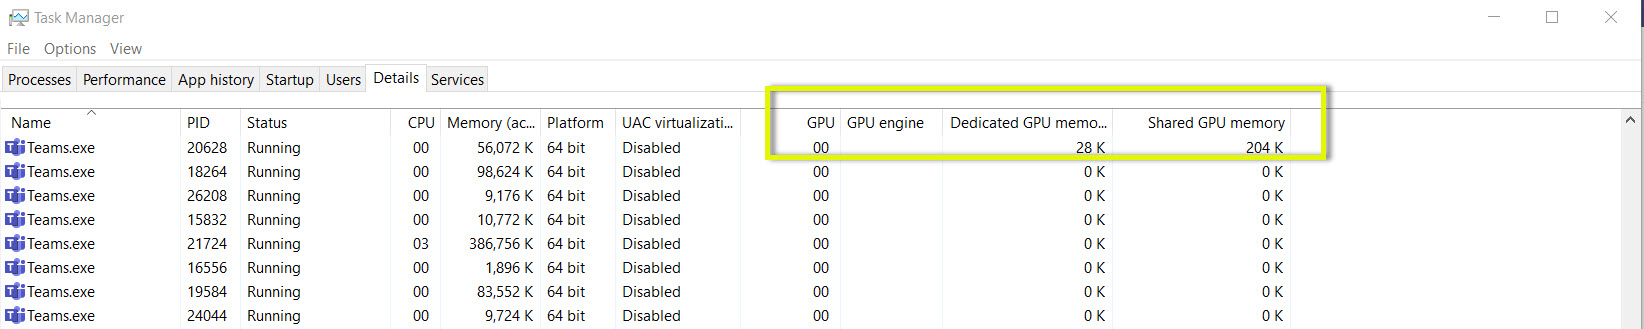 Task Manager Showing Additional GPU Columns Added